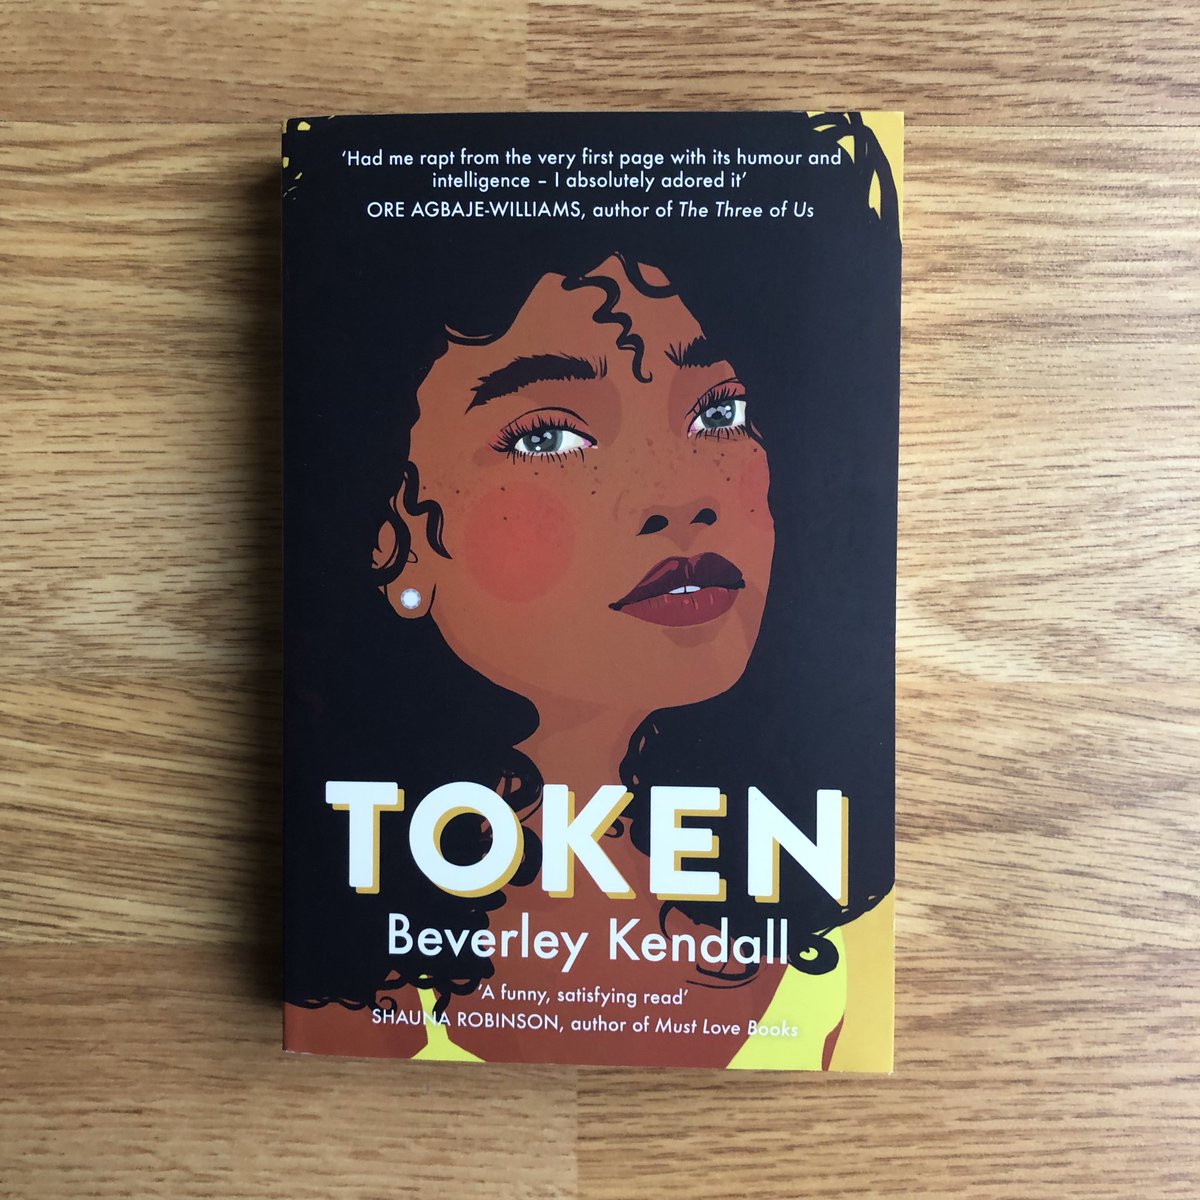 Thank you @BookMinxSJV @TeamBATC for a copy of #Token by #BeverleyKendall

I will be posting my review as part of the blog tour later this month